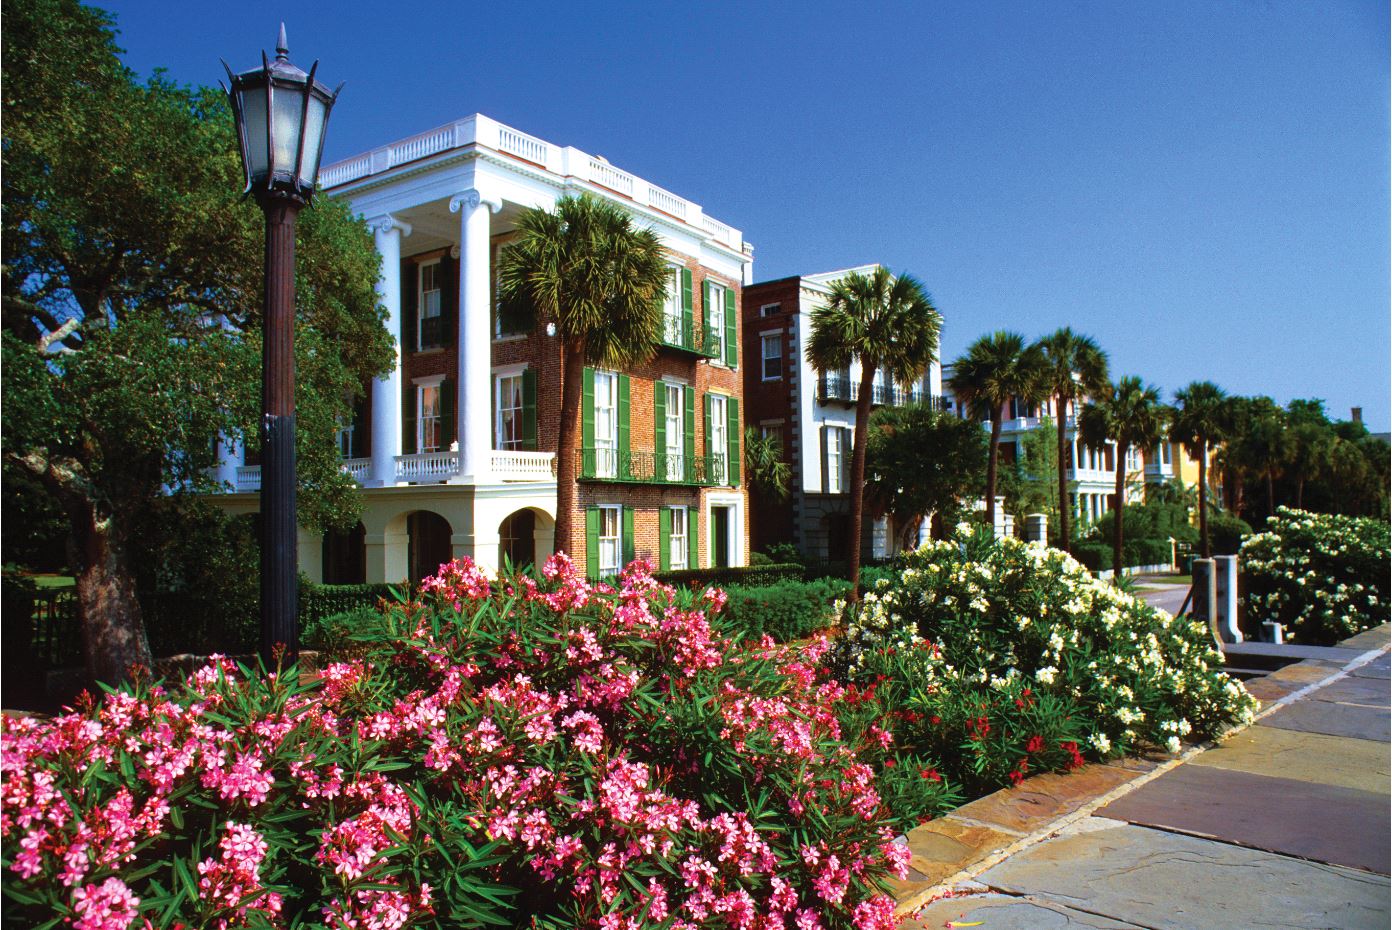 March is a wonderful time of the year in Charleston. The sun is shining, the flowers are blooming, and there are plenty of events, festivals and fun things to do in Charleston.